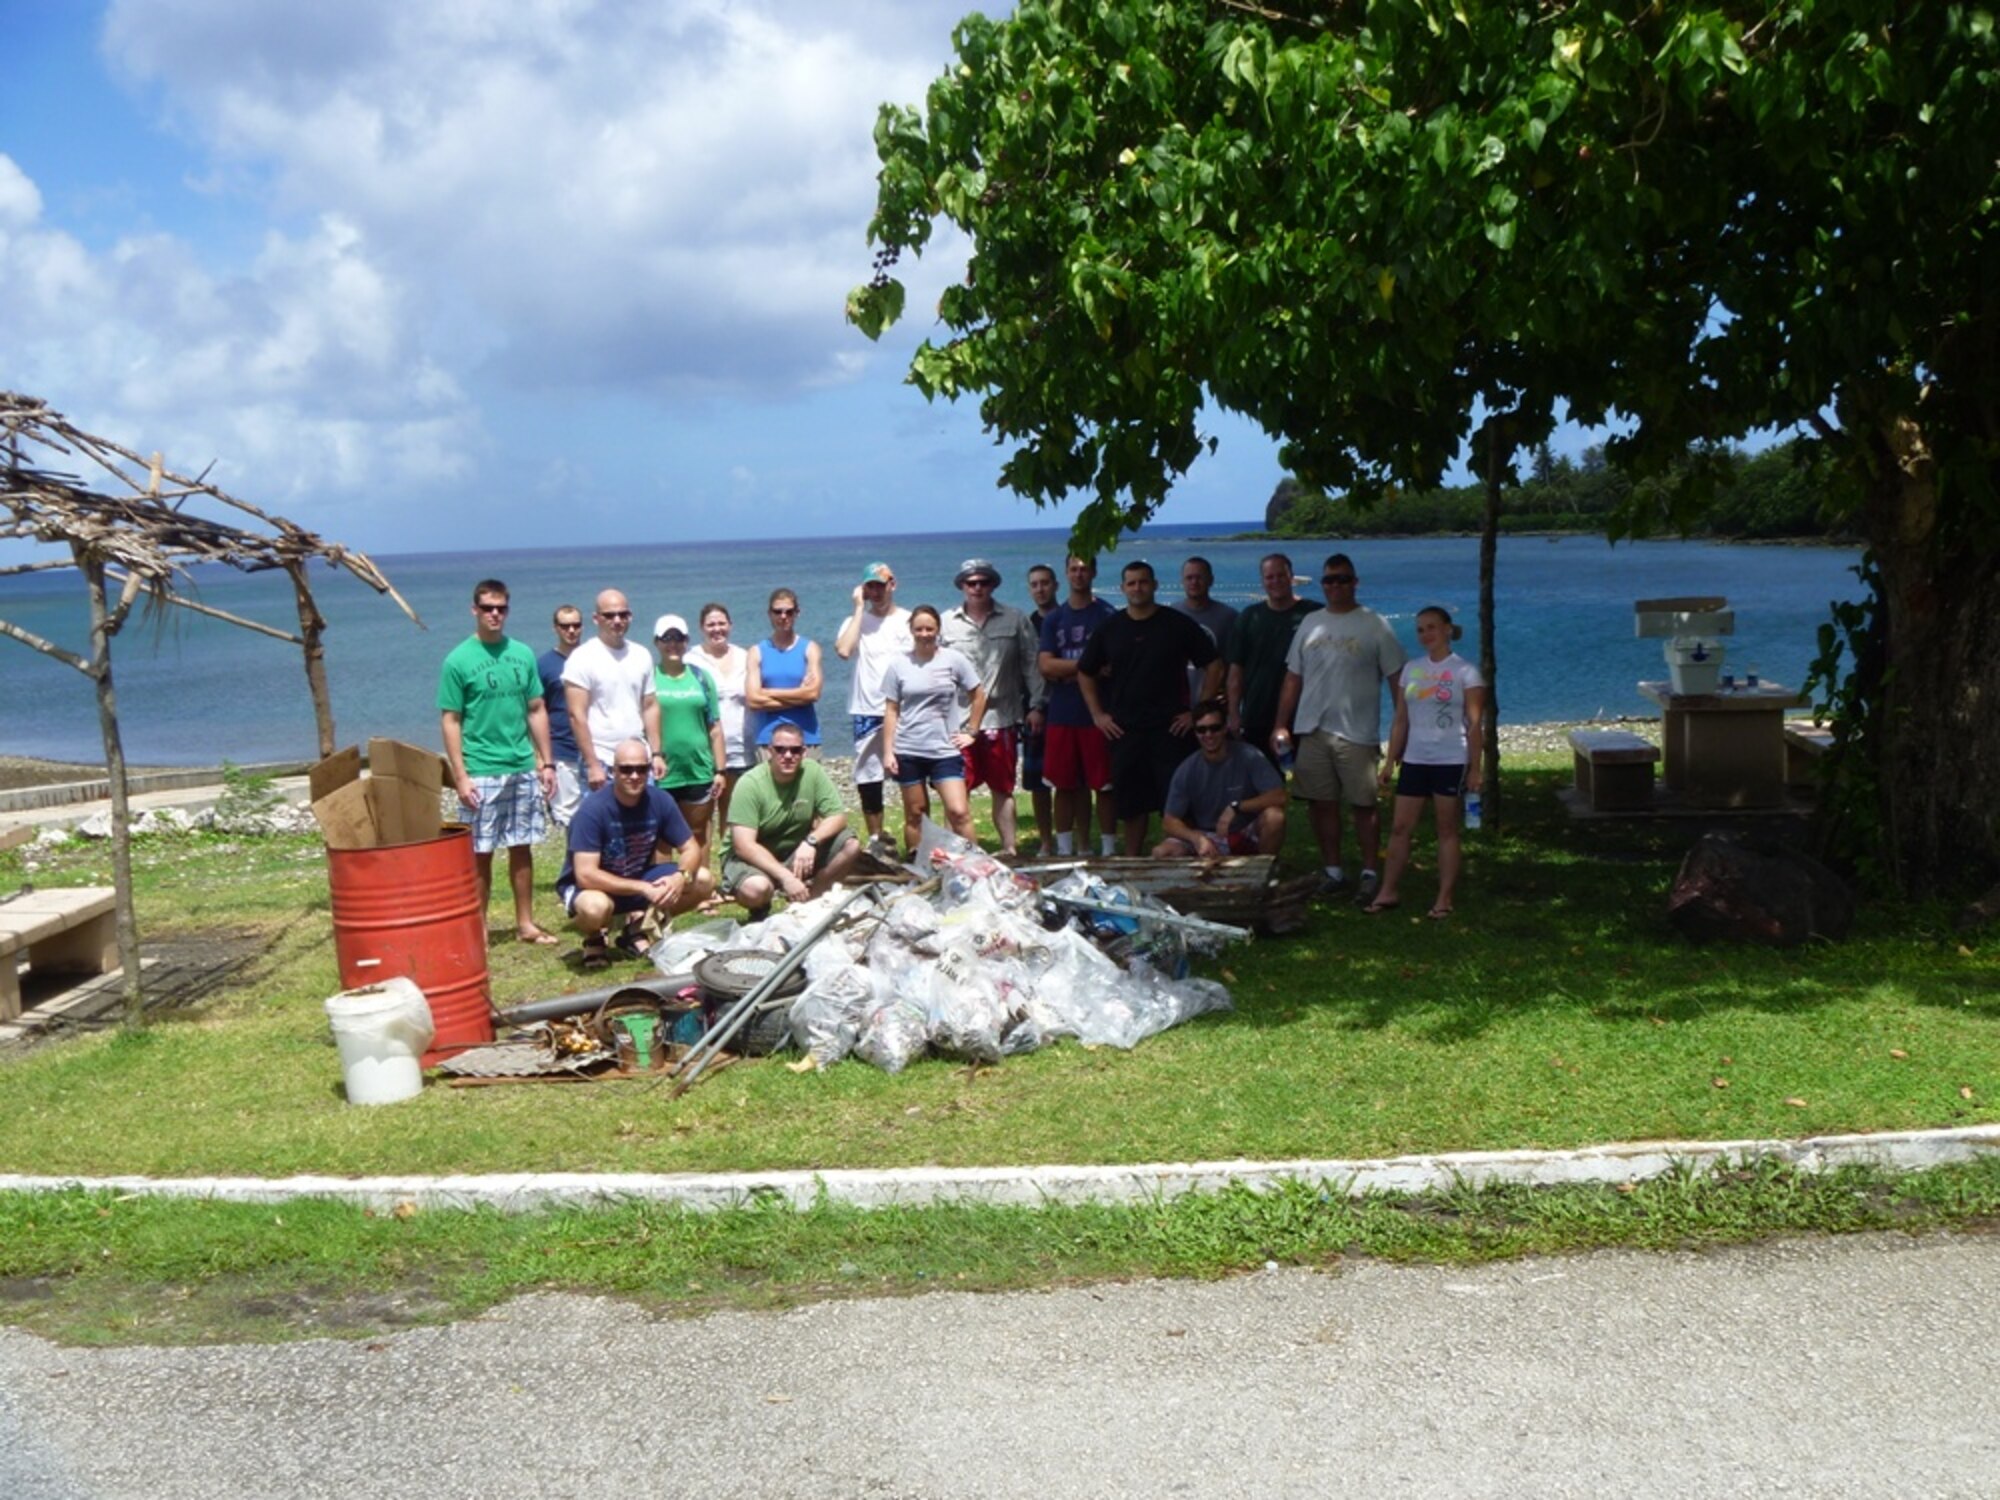 Deployed here in support of Andersen's Continuous Bomber Presence, members of the 96th Expeditionary Bomb Squadron began a 9+6 Beach Cleanup project shortly after their arrival in April. The initiative, aimed at cleaning nine coastal village beaches and six military beaches on the island, earned the unit Guam Chamber of Commerce's Na' La' Bonita Award. (U.S. Air Force Courtesy Photo)